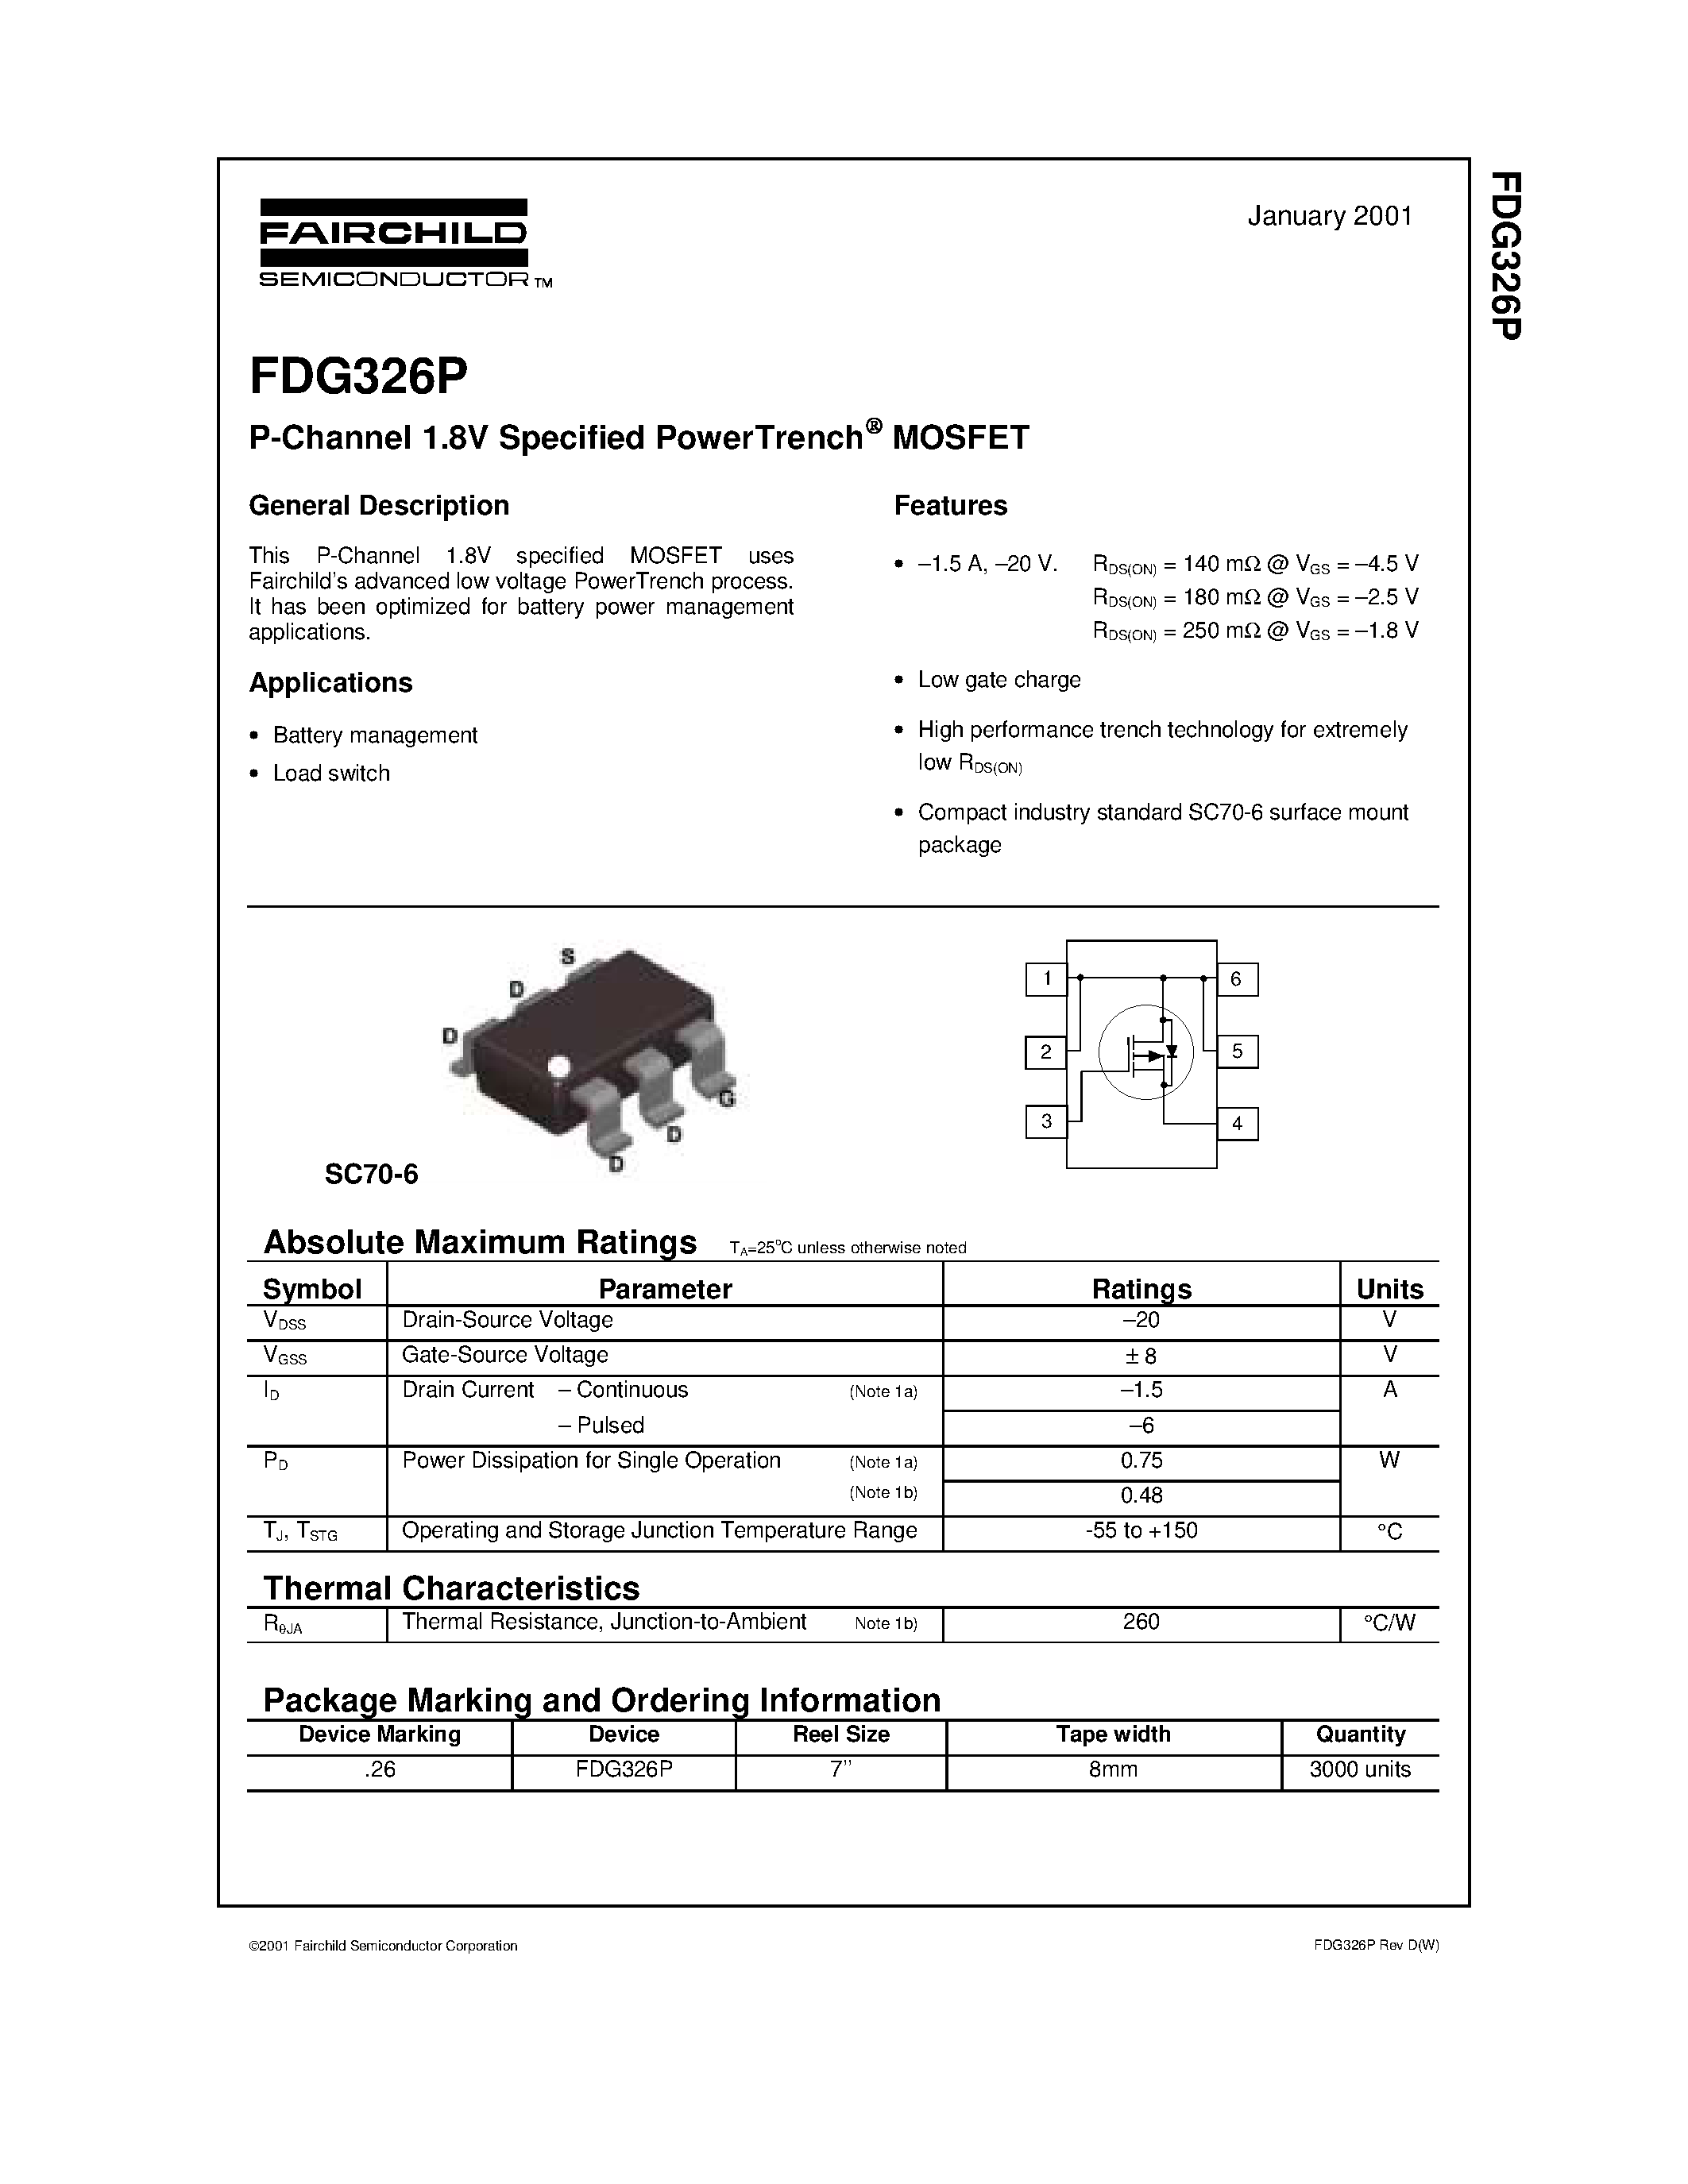 Даташит FDG326 - P-Channel 1.8V Specified PowerTrench MOSFET страница 1